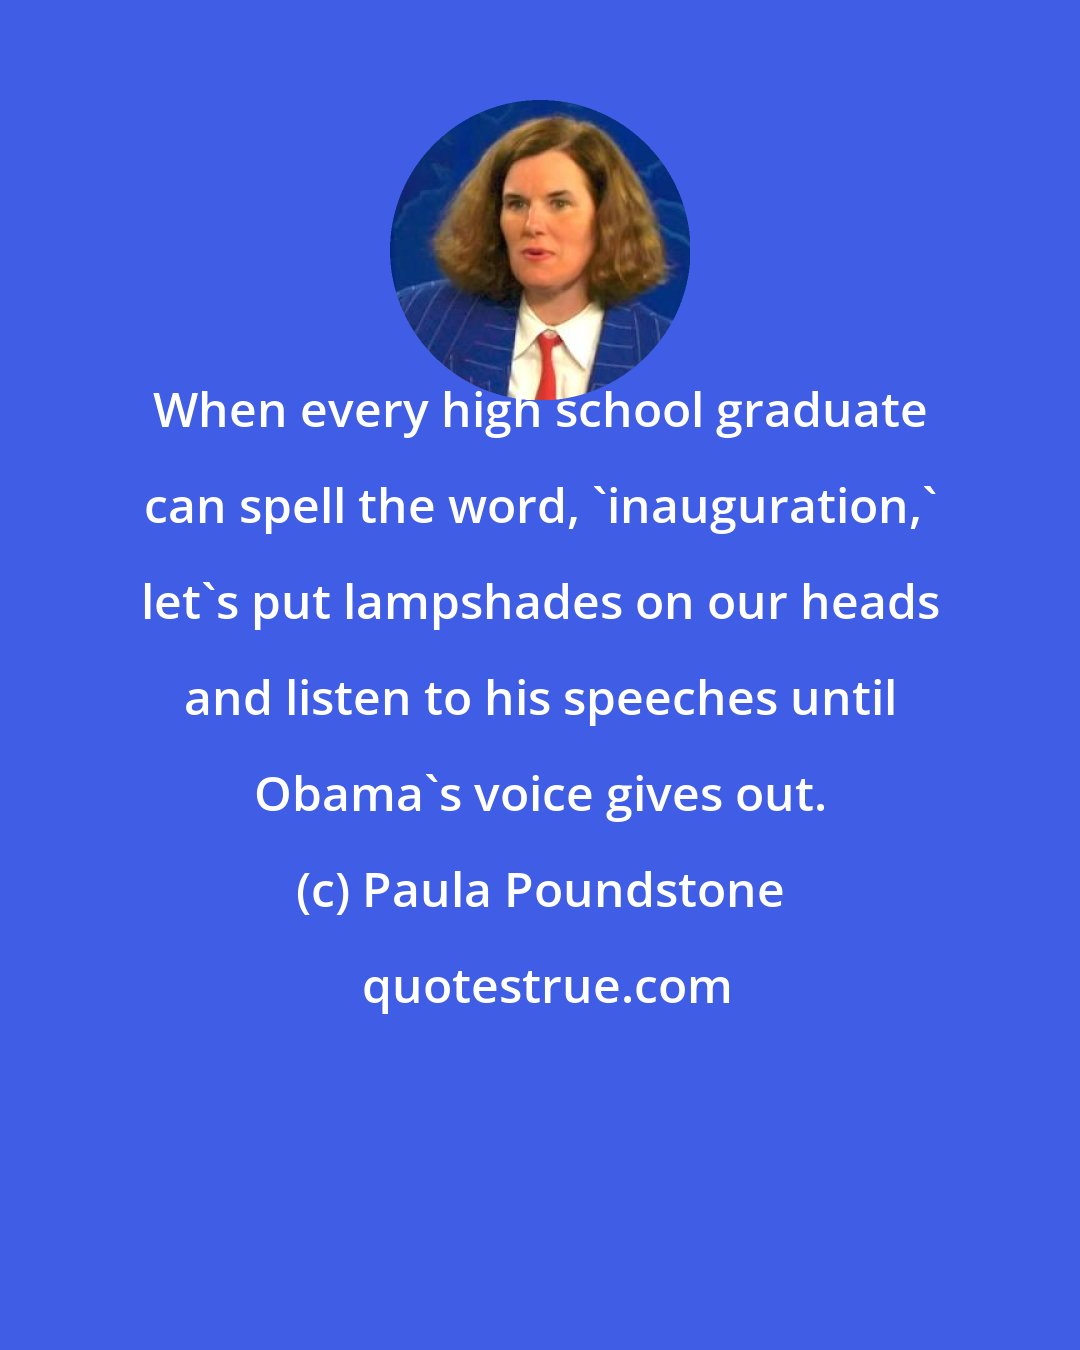 Paula Poundstone: When every high school graduate can spell the word, 'inauguration,' let's put lampshades on our heads and listen to his speeches until Obama's voice gives out.